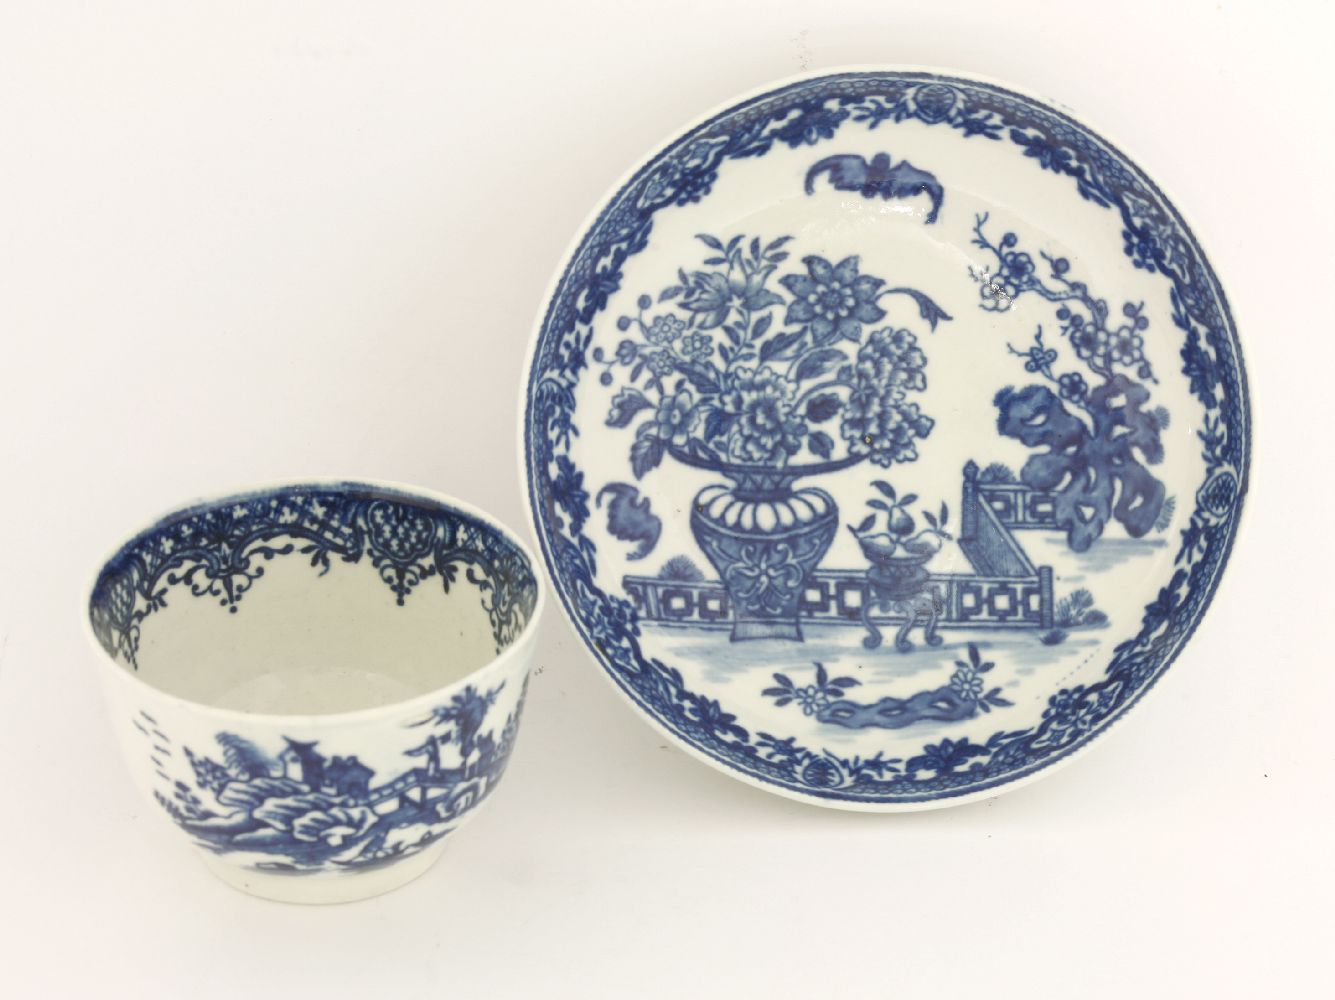 A Worcester blue and white Tea Bowl and Saucer,c.1780, printed in 'The Bat' pattern, disguised